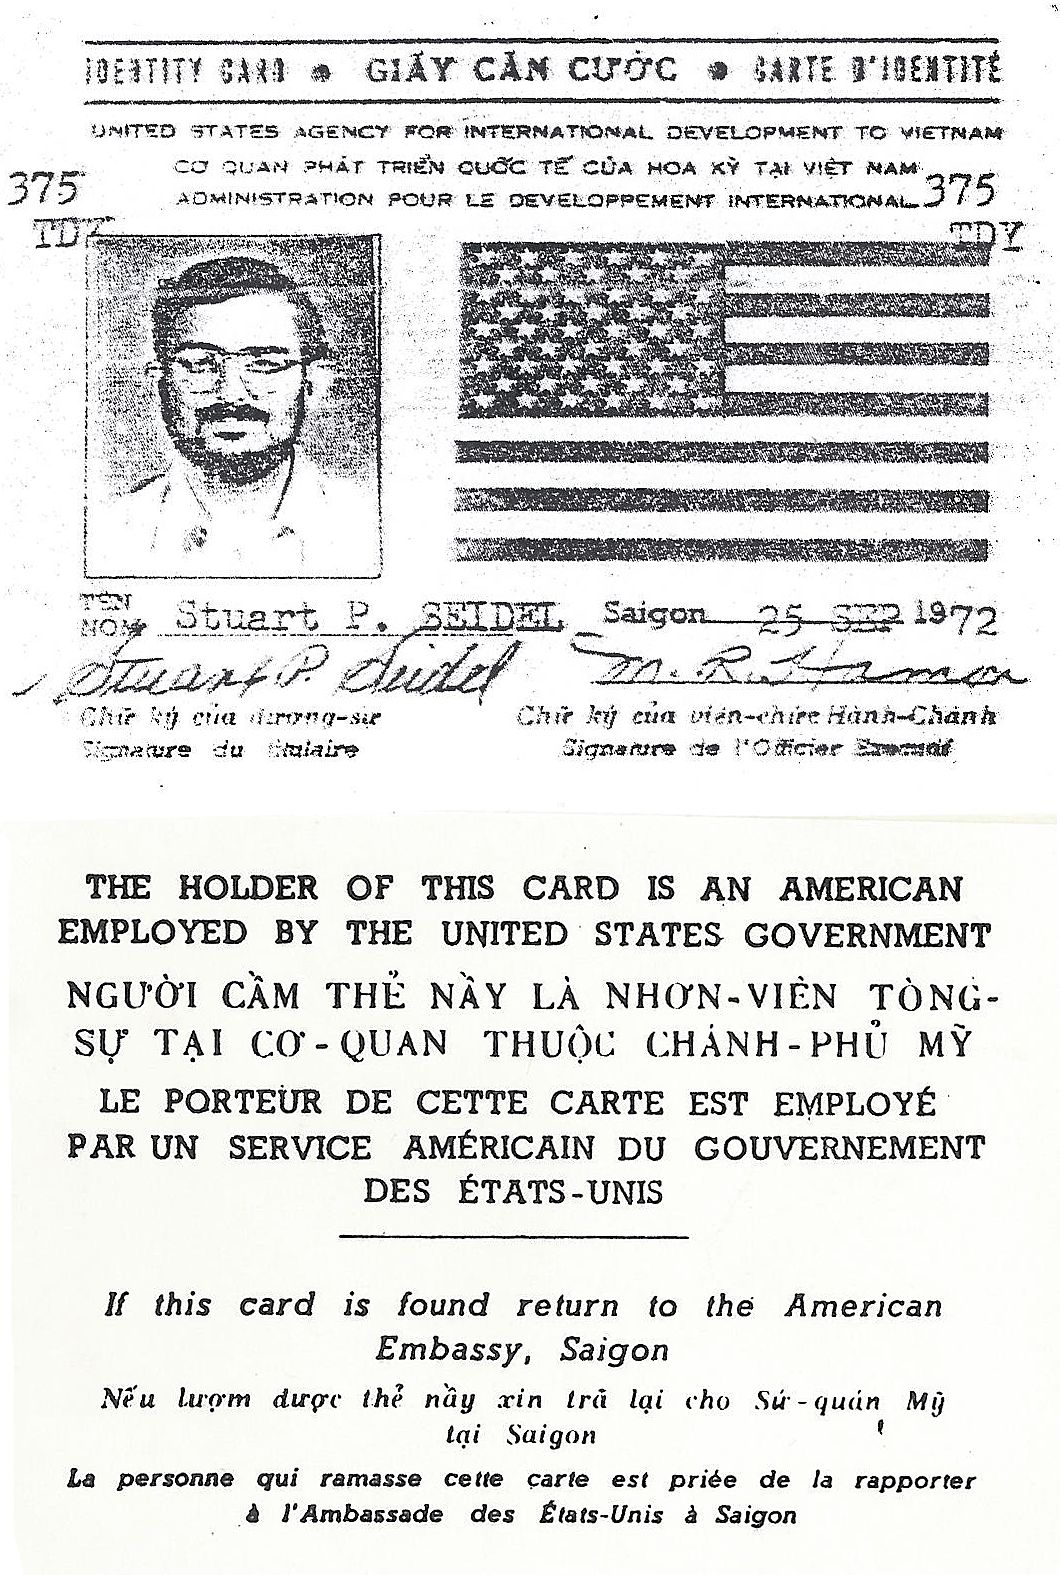 As an attorney in the Chief Counsel's office at Customs headquarters in Washington, Stuart P. Seidel was invited to Saigon in 1972 to review the draft customs code of the Republic of Vietnam. He worked with Officer Nguyen Tan Thanh to study the laws and suggest modifications. Most of the recommendations in his final 56-page report were adopted in the new Vietnamese Customs Code. This image is from a photocopy of Mr. Seidel's Vietnam identification card; the original was turned in when he left the country. (Courtesy Stuart P. Seidel)